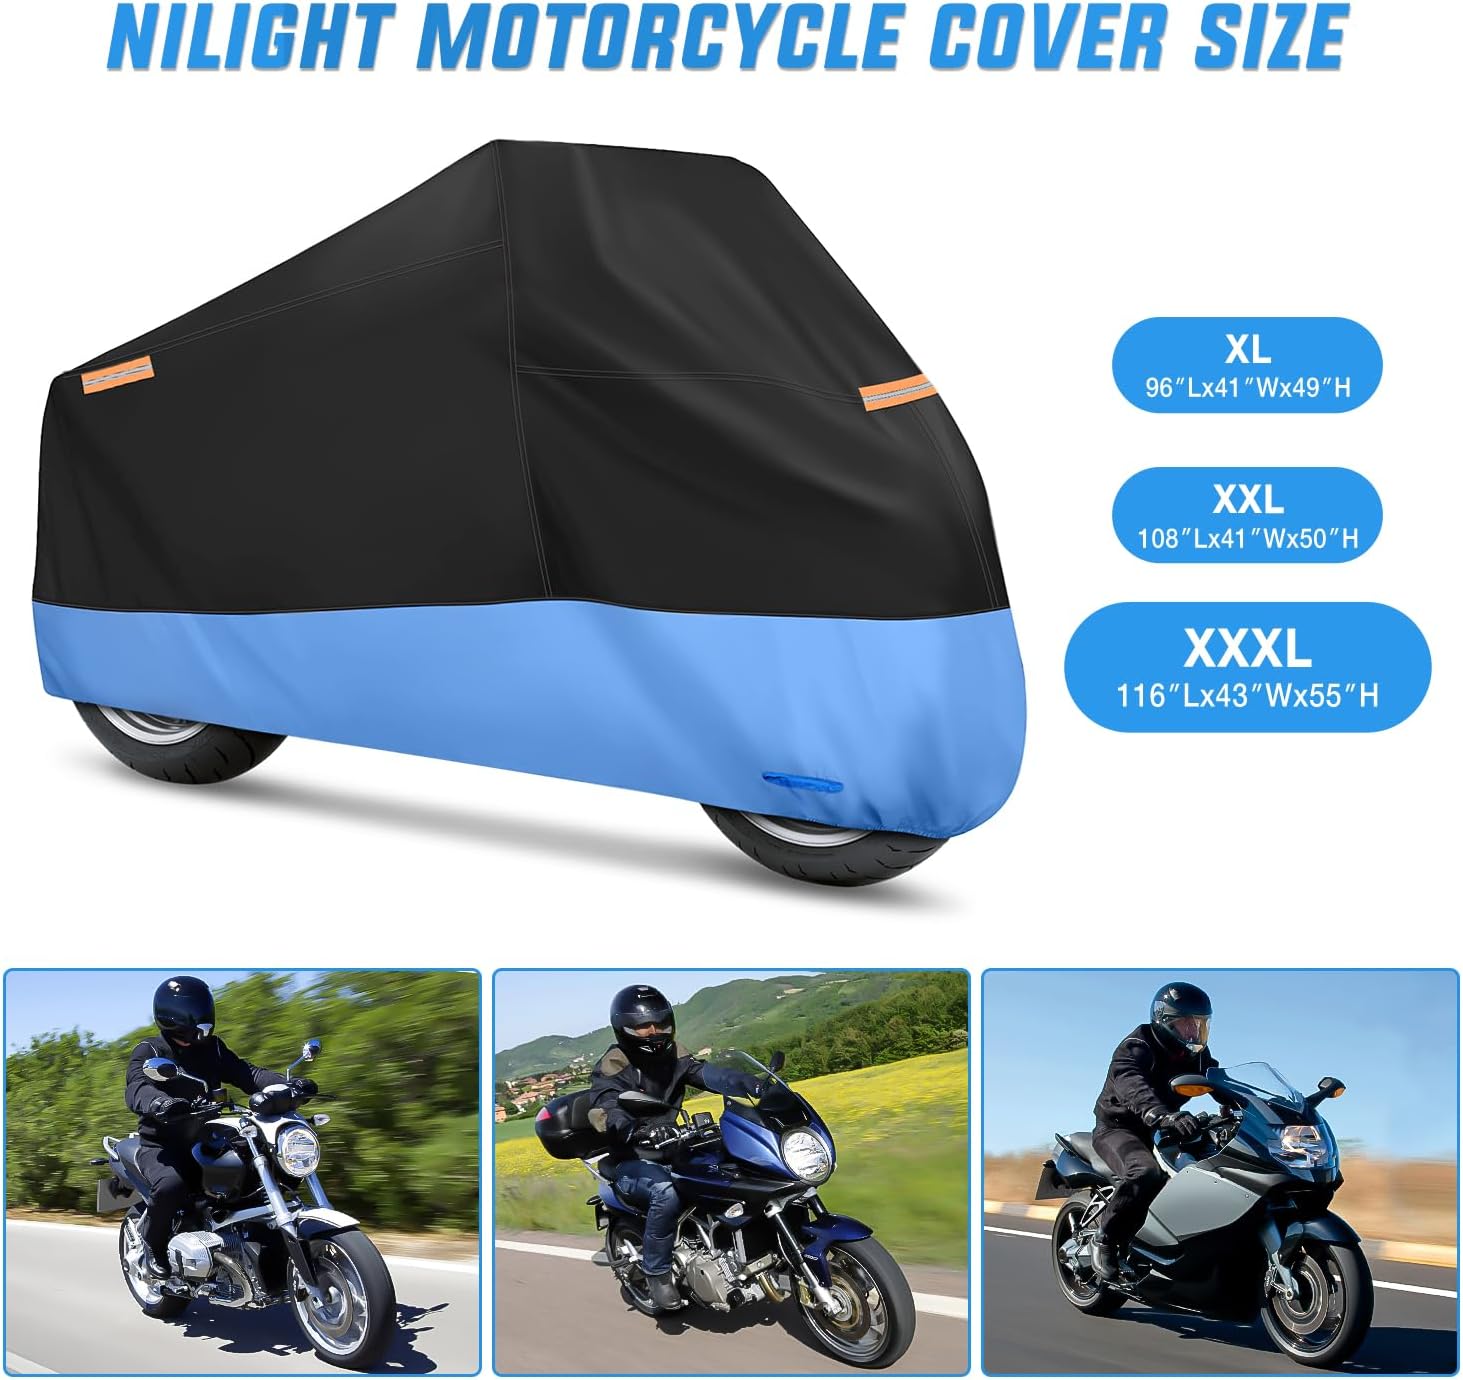 Motorcycle Cover with Lock-Hole Storage Bag & Protective Reflective Strip Fits up to 116" Nilight